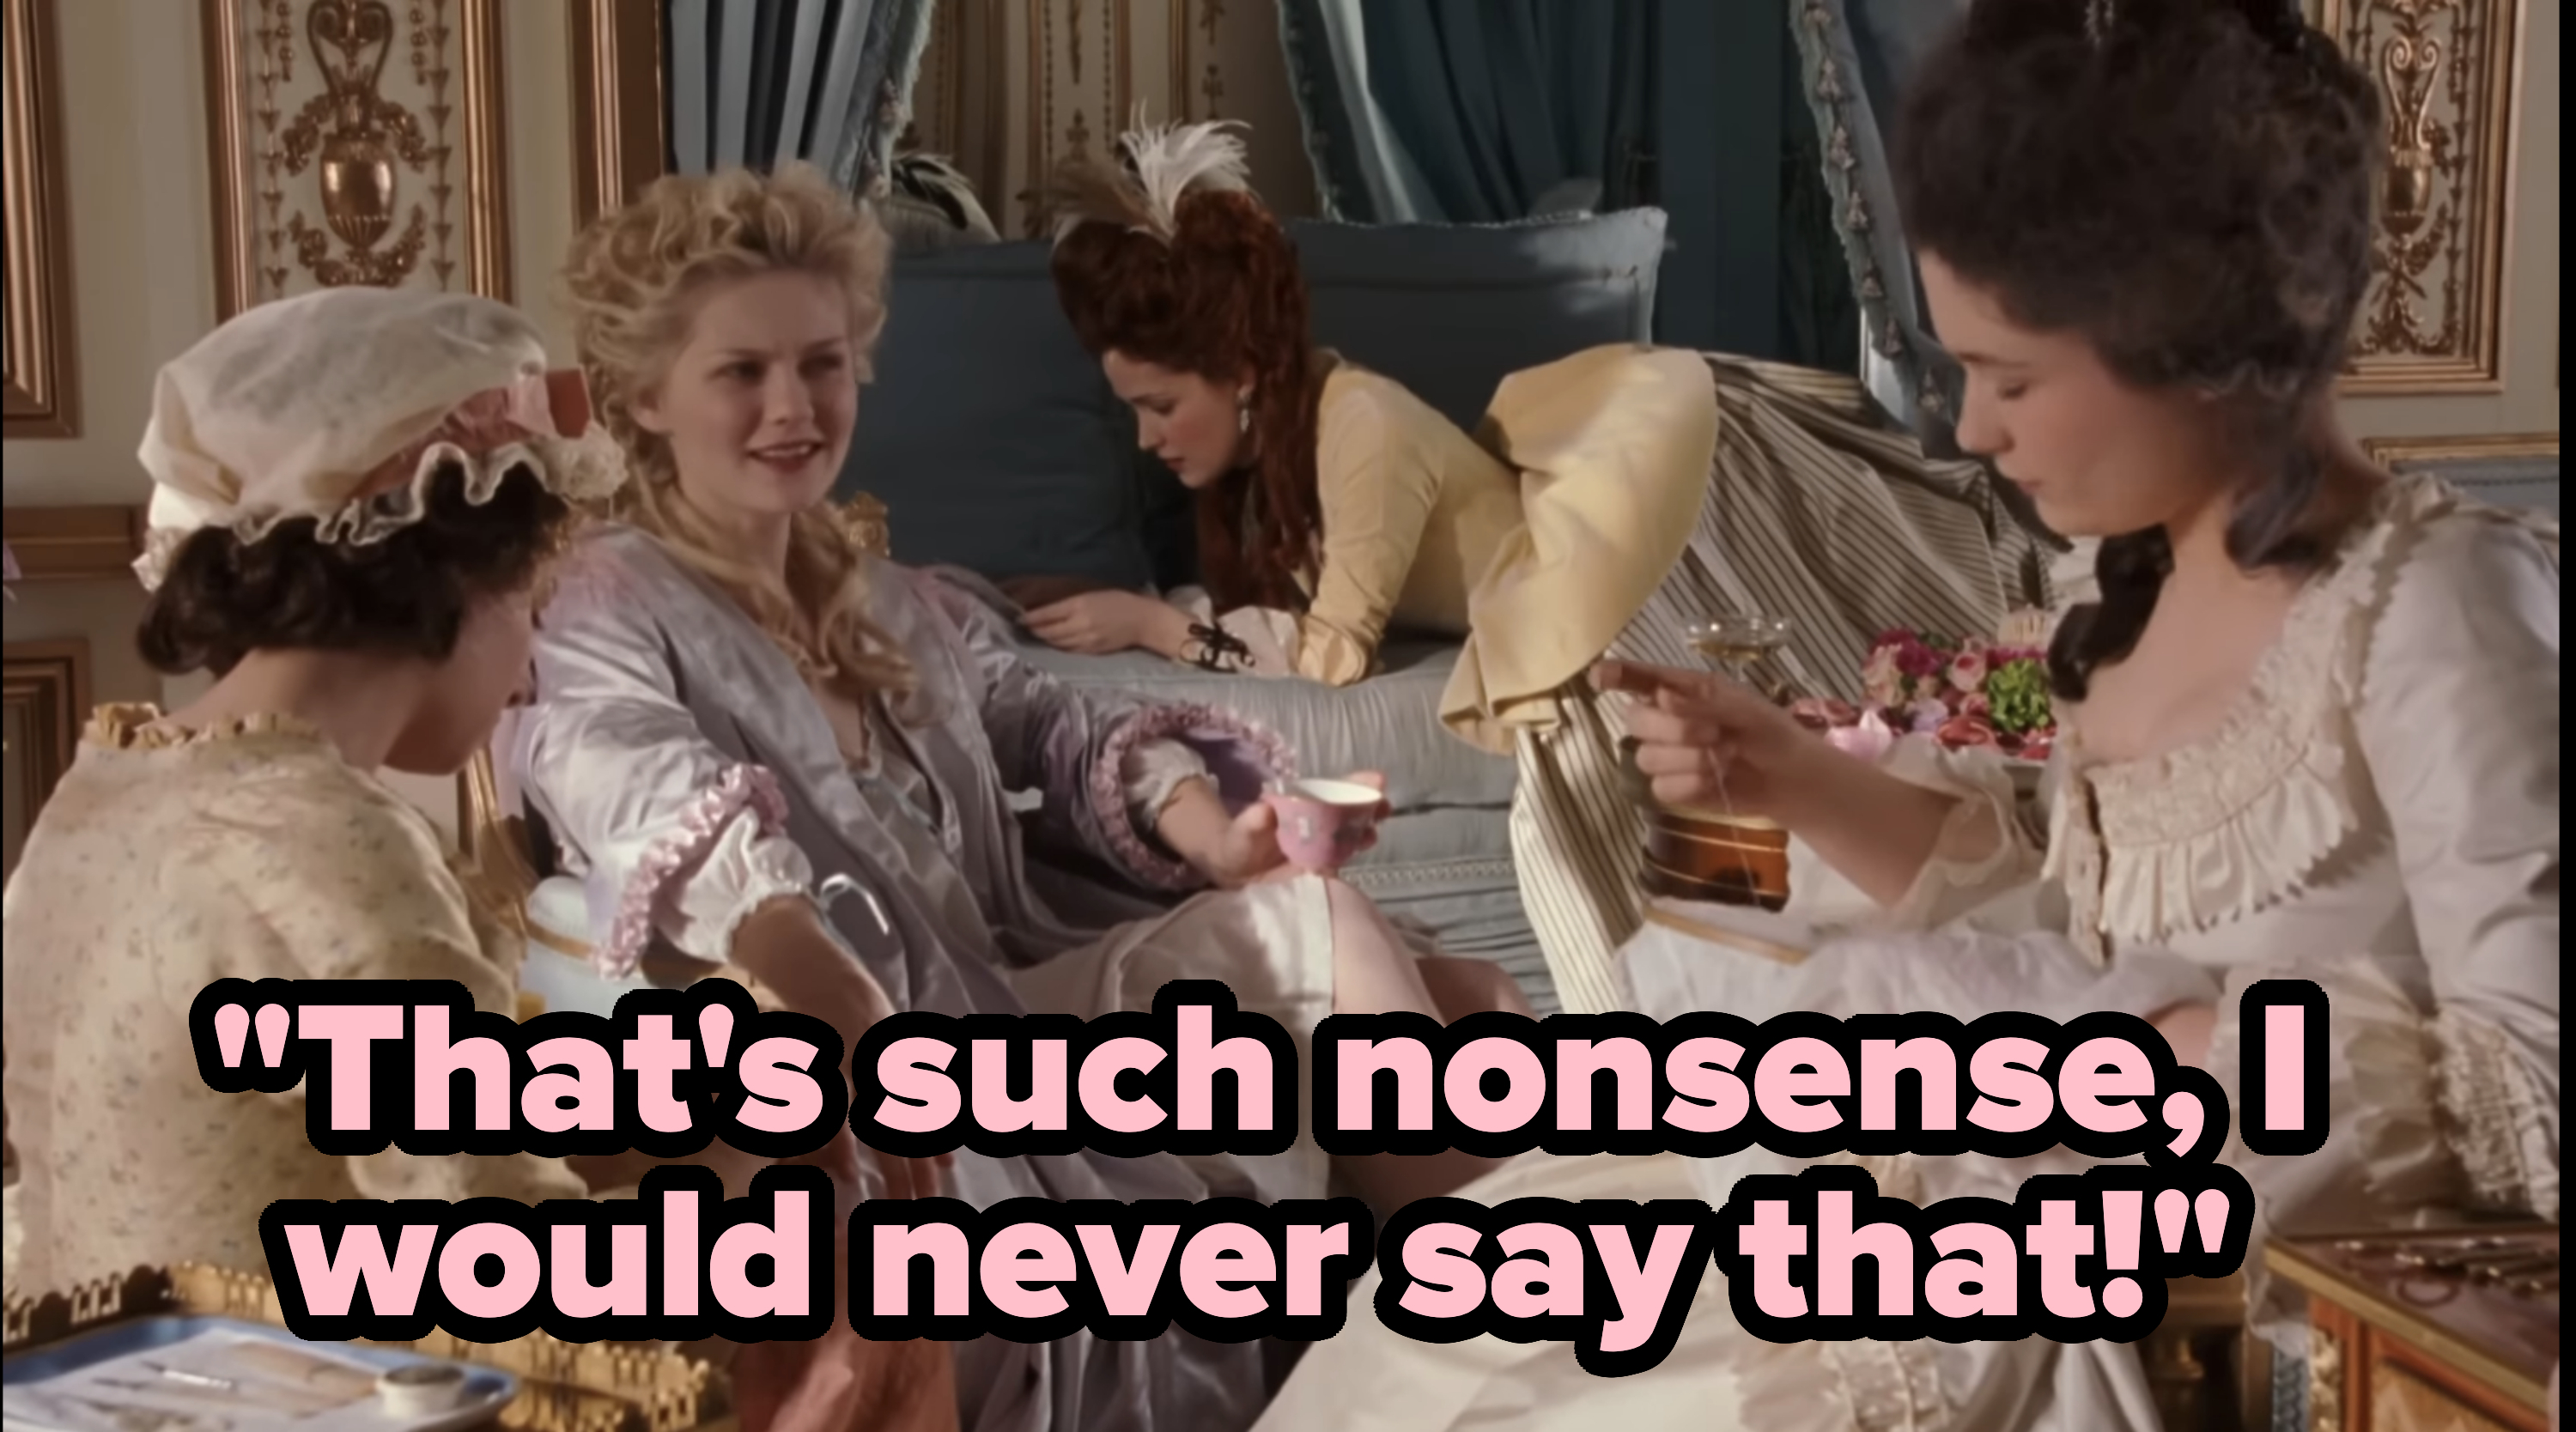 From &quot;Marie Antoinette&quot; (2006): Marie, surrounded by 3 ladies, saying &quot;That&#x27;s such nonsense, I would never say that!